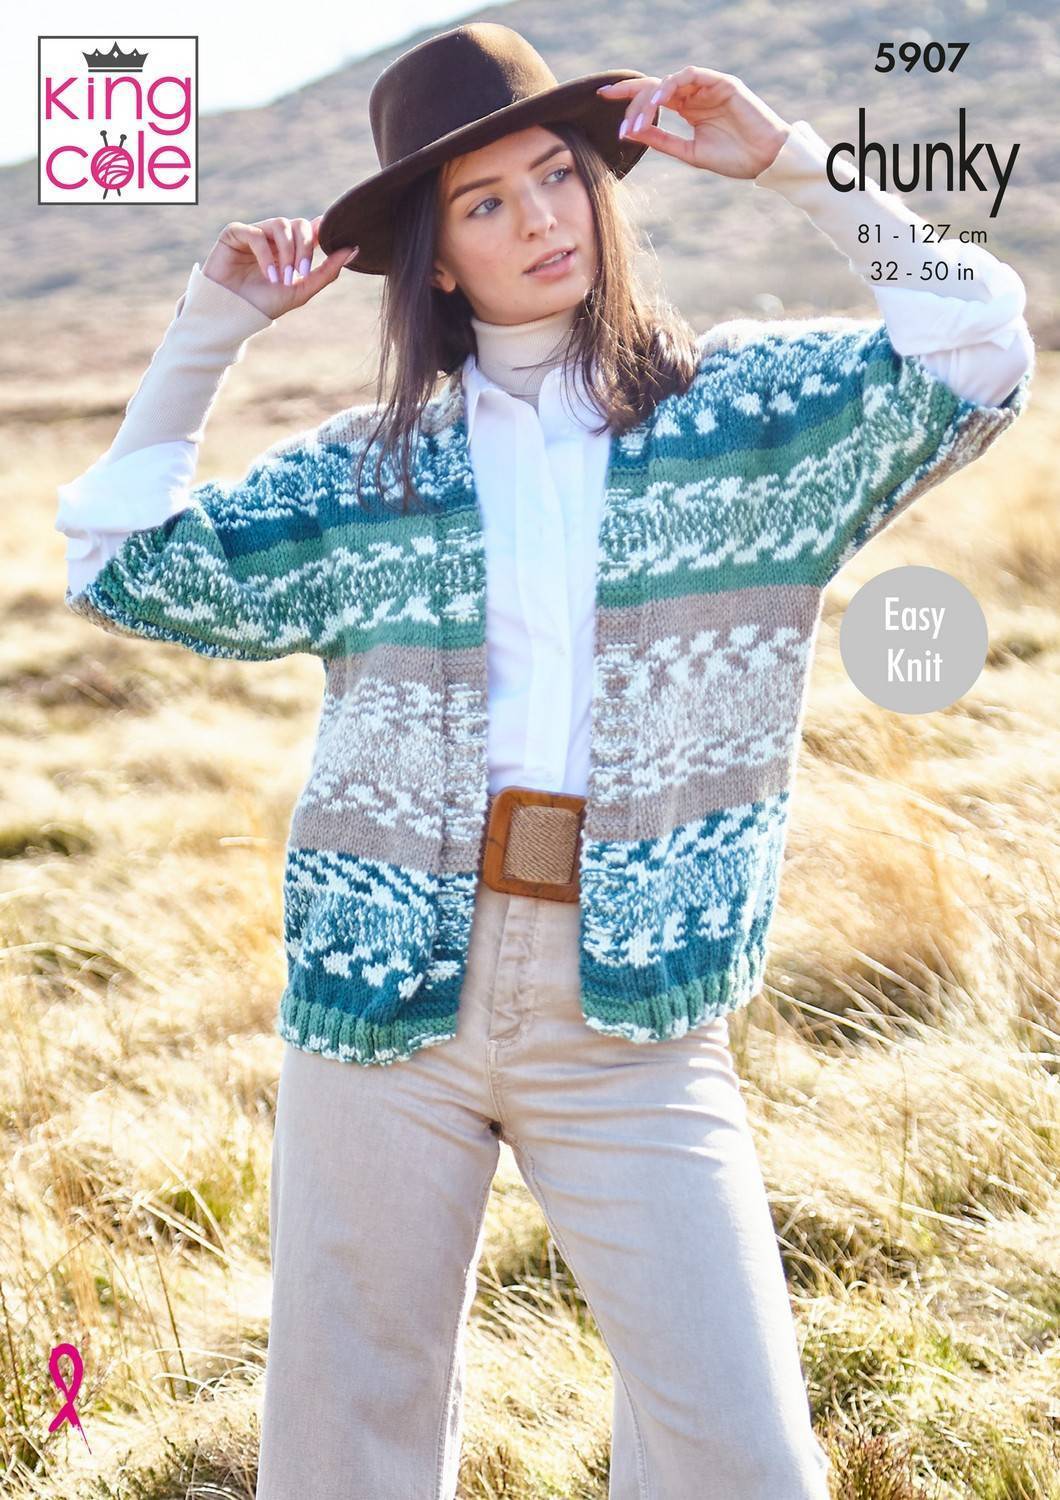 Waistcoat and Cardigan in King Cole Nordic Chunky (5907) | The Knitting ...